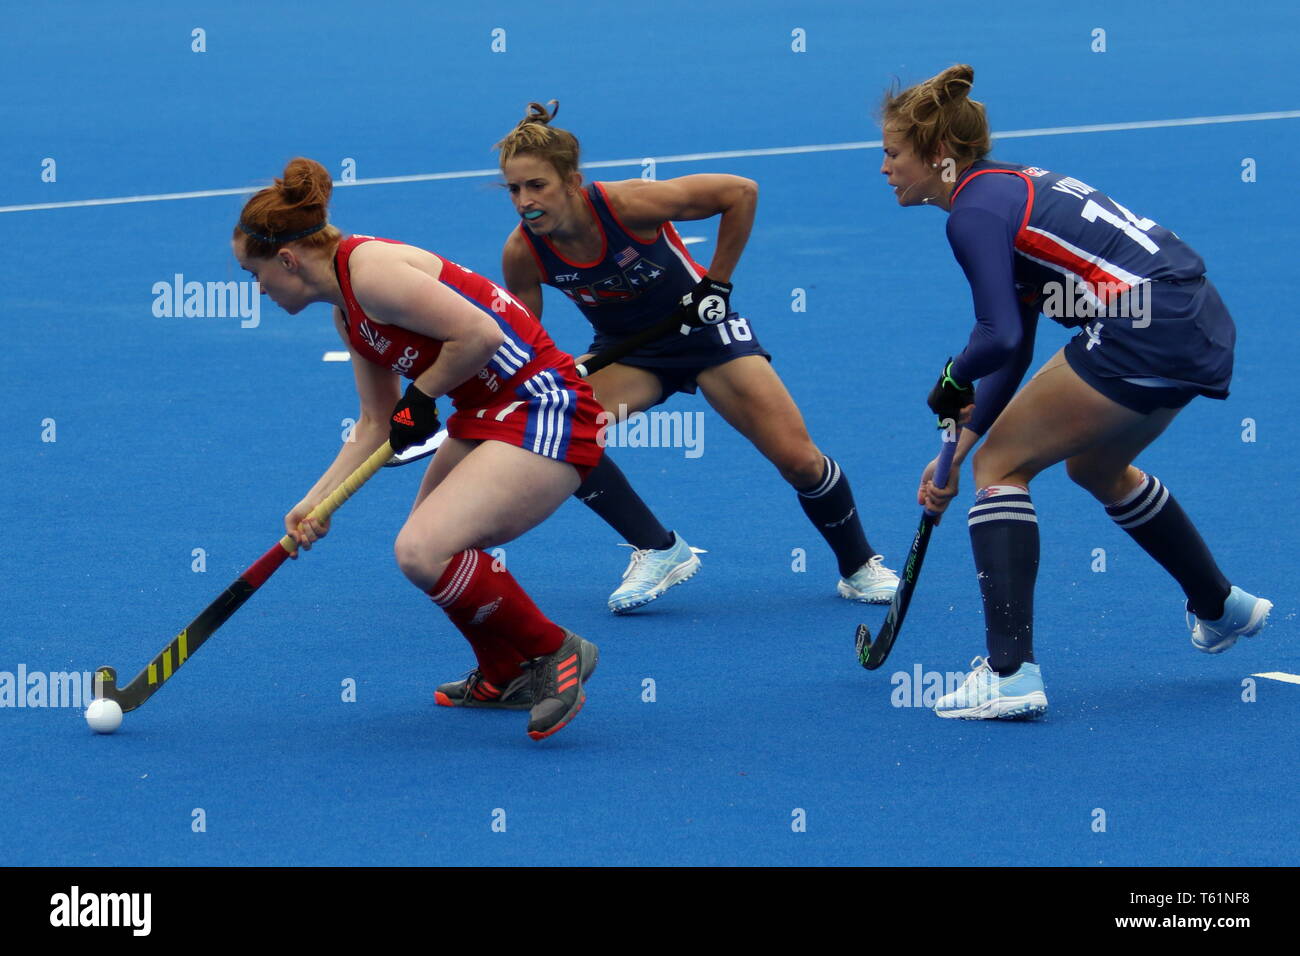 Sarah Jones (GBR) defending off Julia Young (USA) in the 2019 FIH Pro League Great Britain v United States women’s hockey match at the Olympic Park Stock Photo